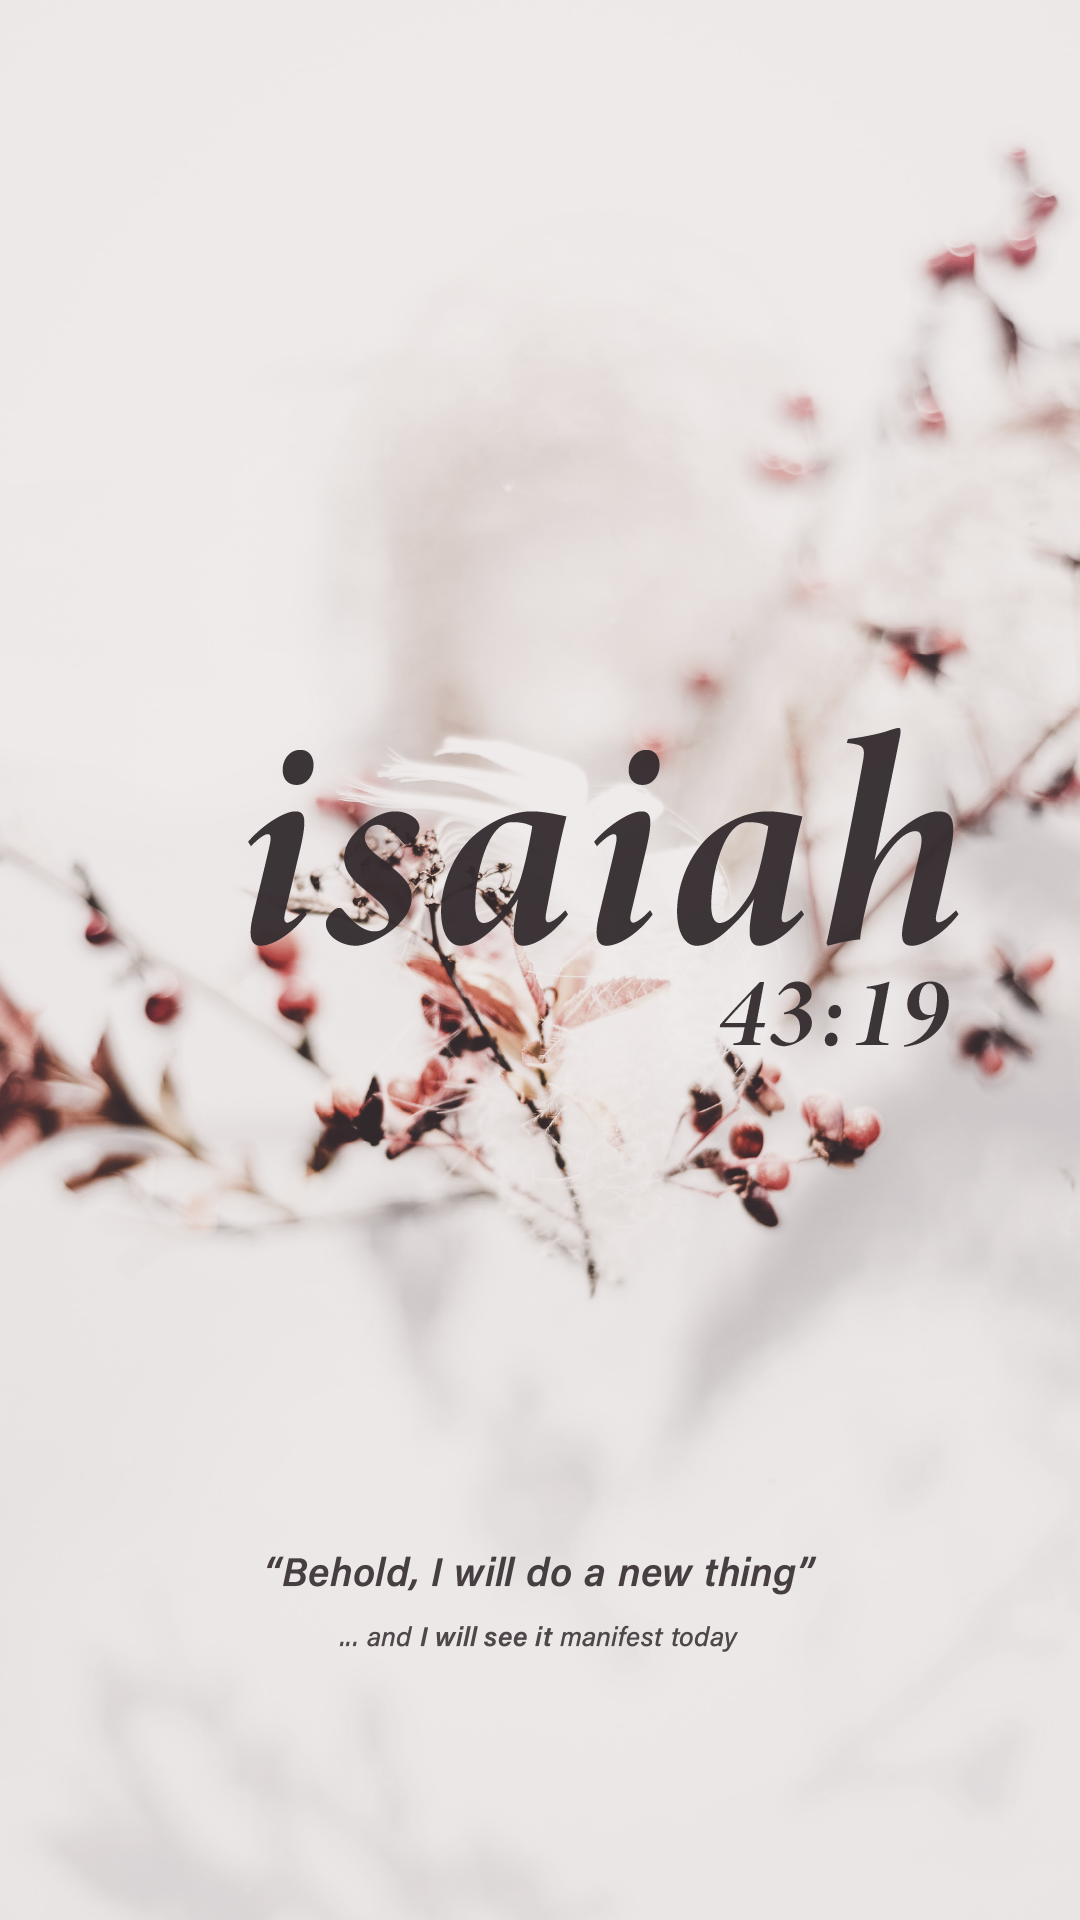 Aesthetic Christian Wallpapers